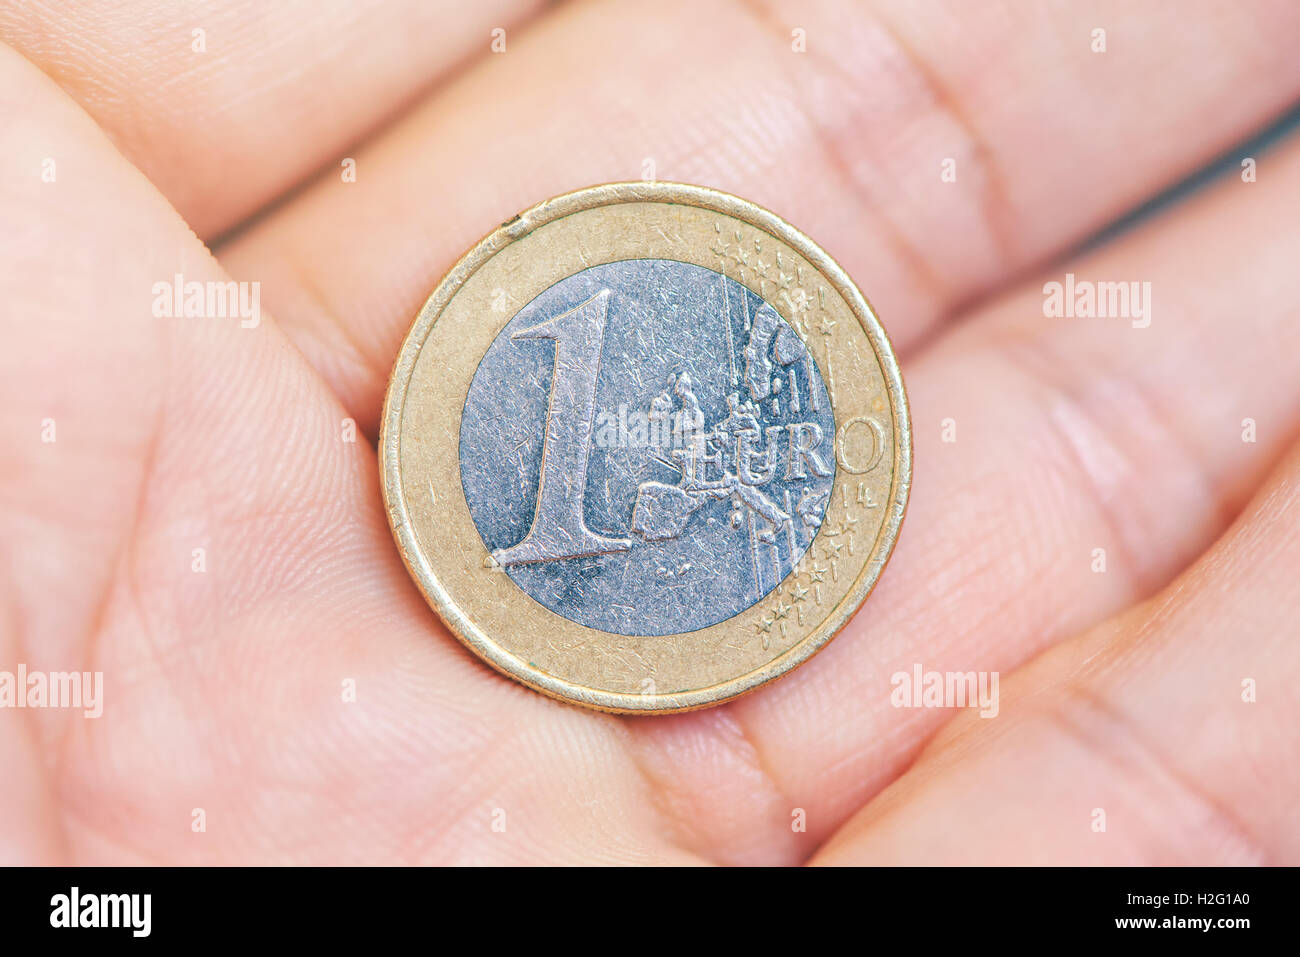 Man offering one euro coin on hand palm - business, finance, economy, funding, savings or money donation concept. Stock Photo